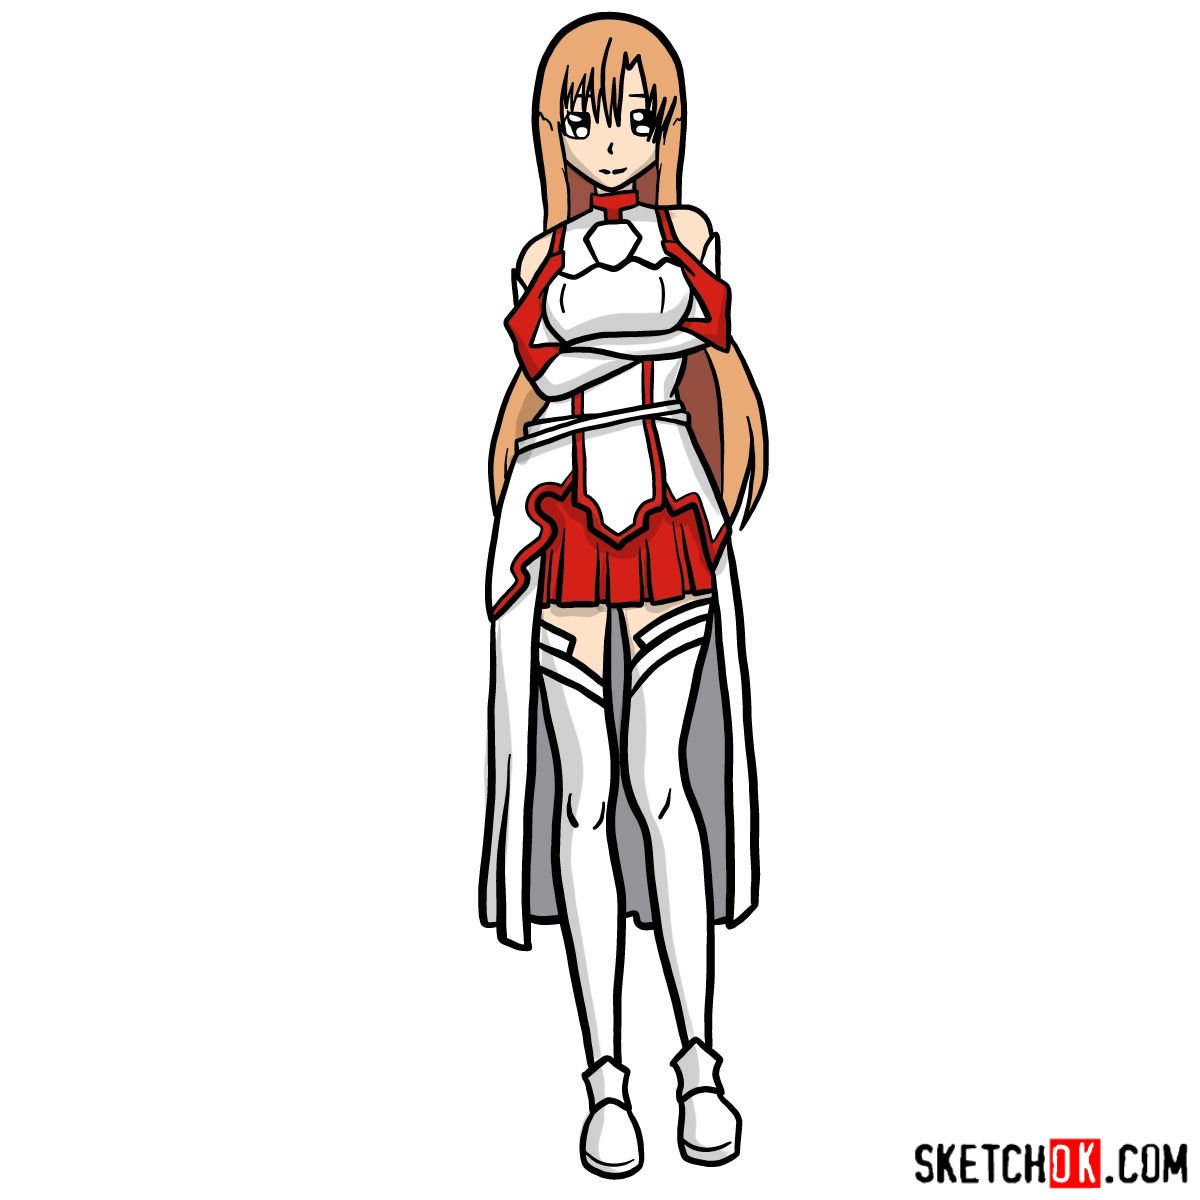 How to draw Yuuki Asuna from Sword Art Online - Sketchok easy drawing guides